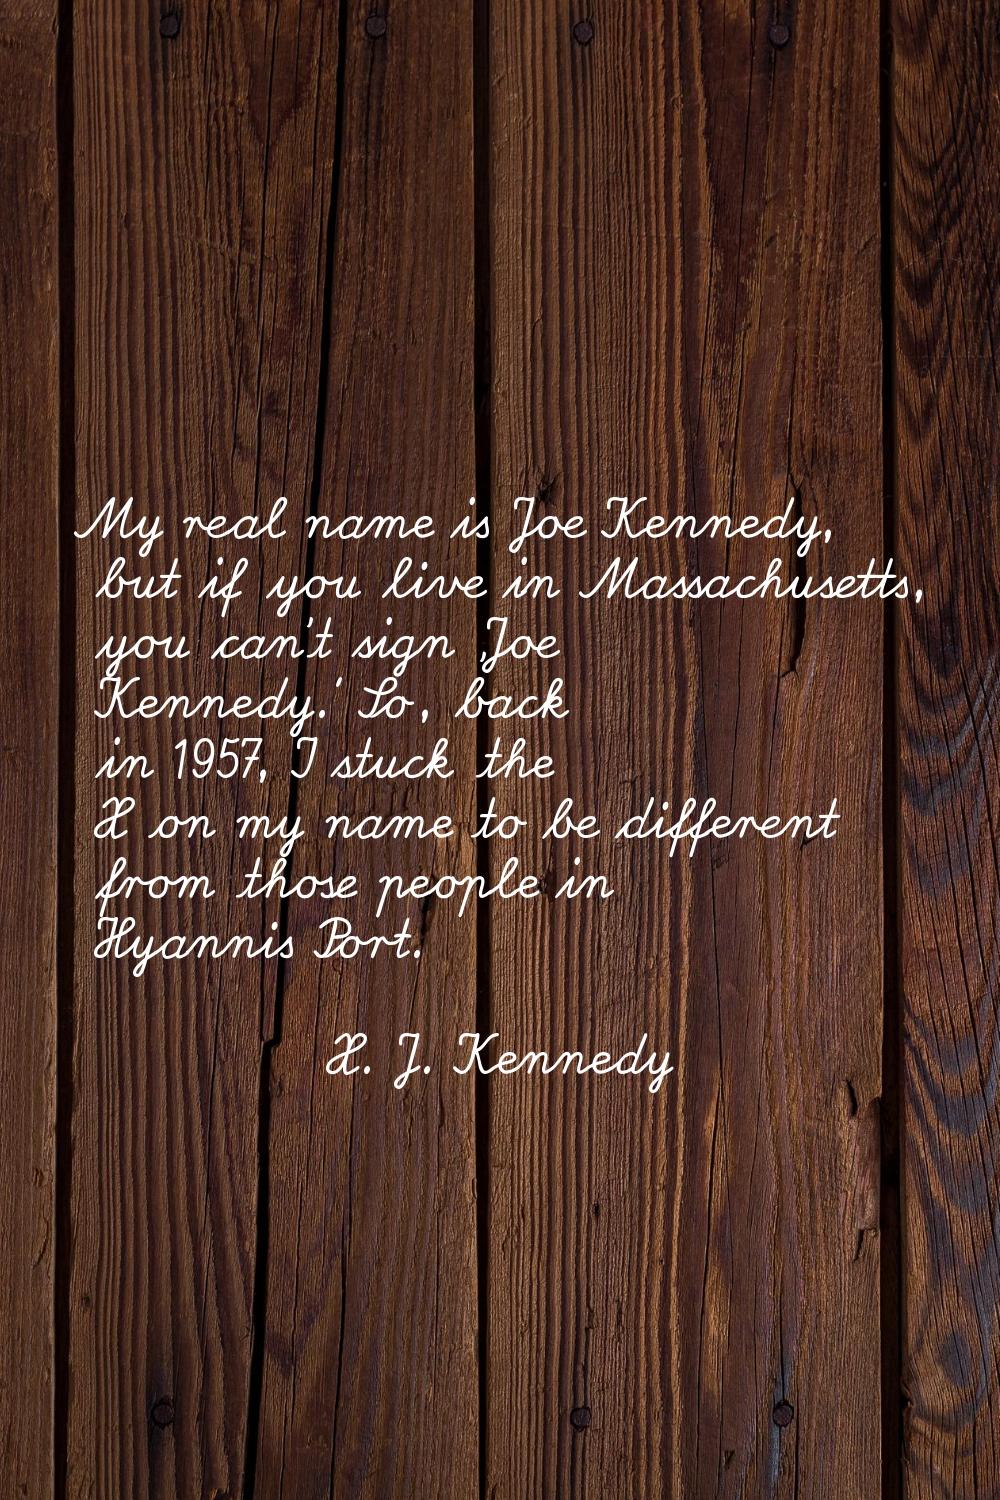 My real name is Joe Kennedy, but if you live in Massachusetts, you can't sign 'Joe Kennedy.' So, ba